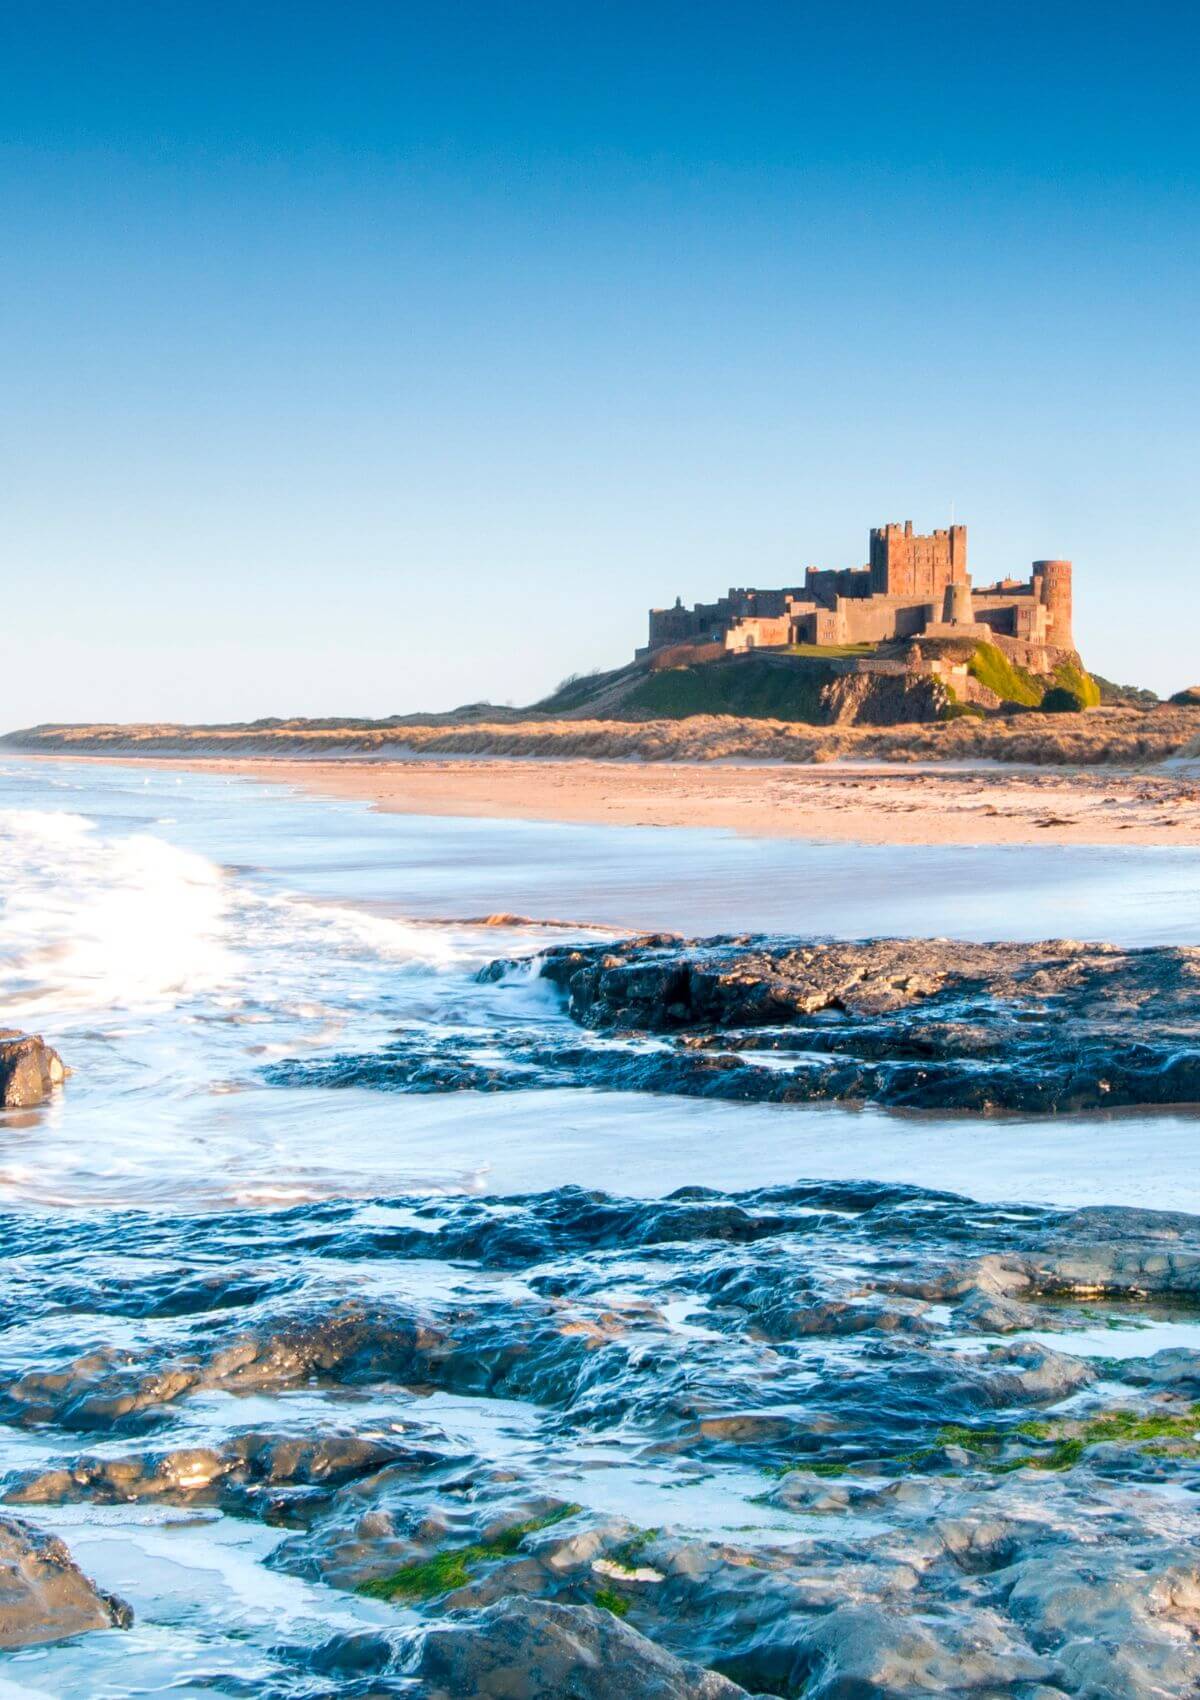 Bamburgh Castle in England, one of the highlights of Northumberland